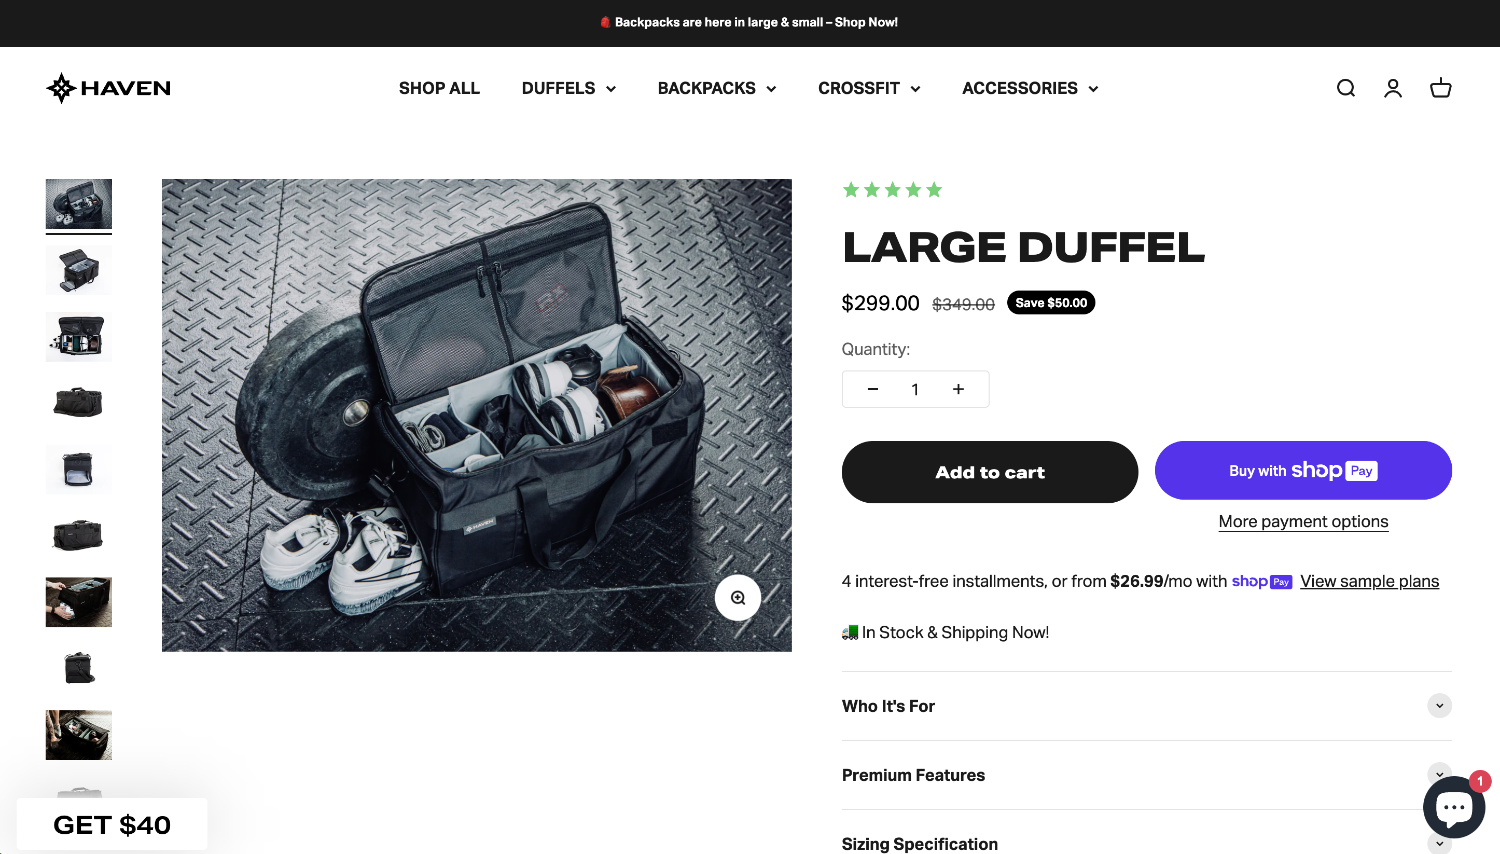 A product page for a product on the brand Haven's ecommerce website